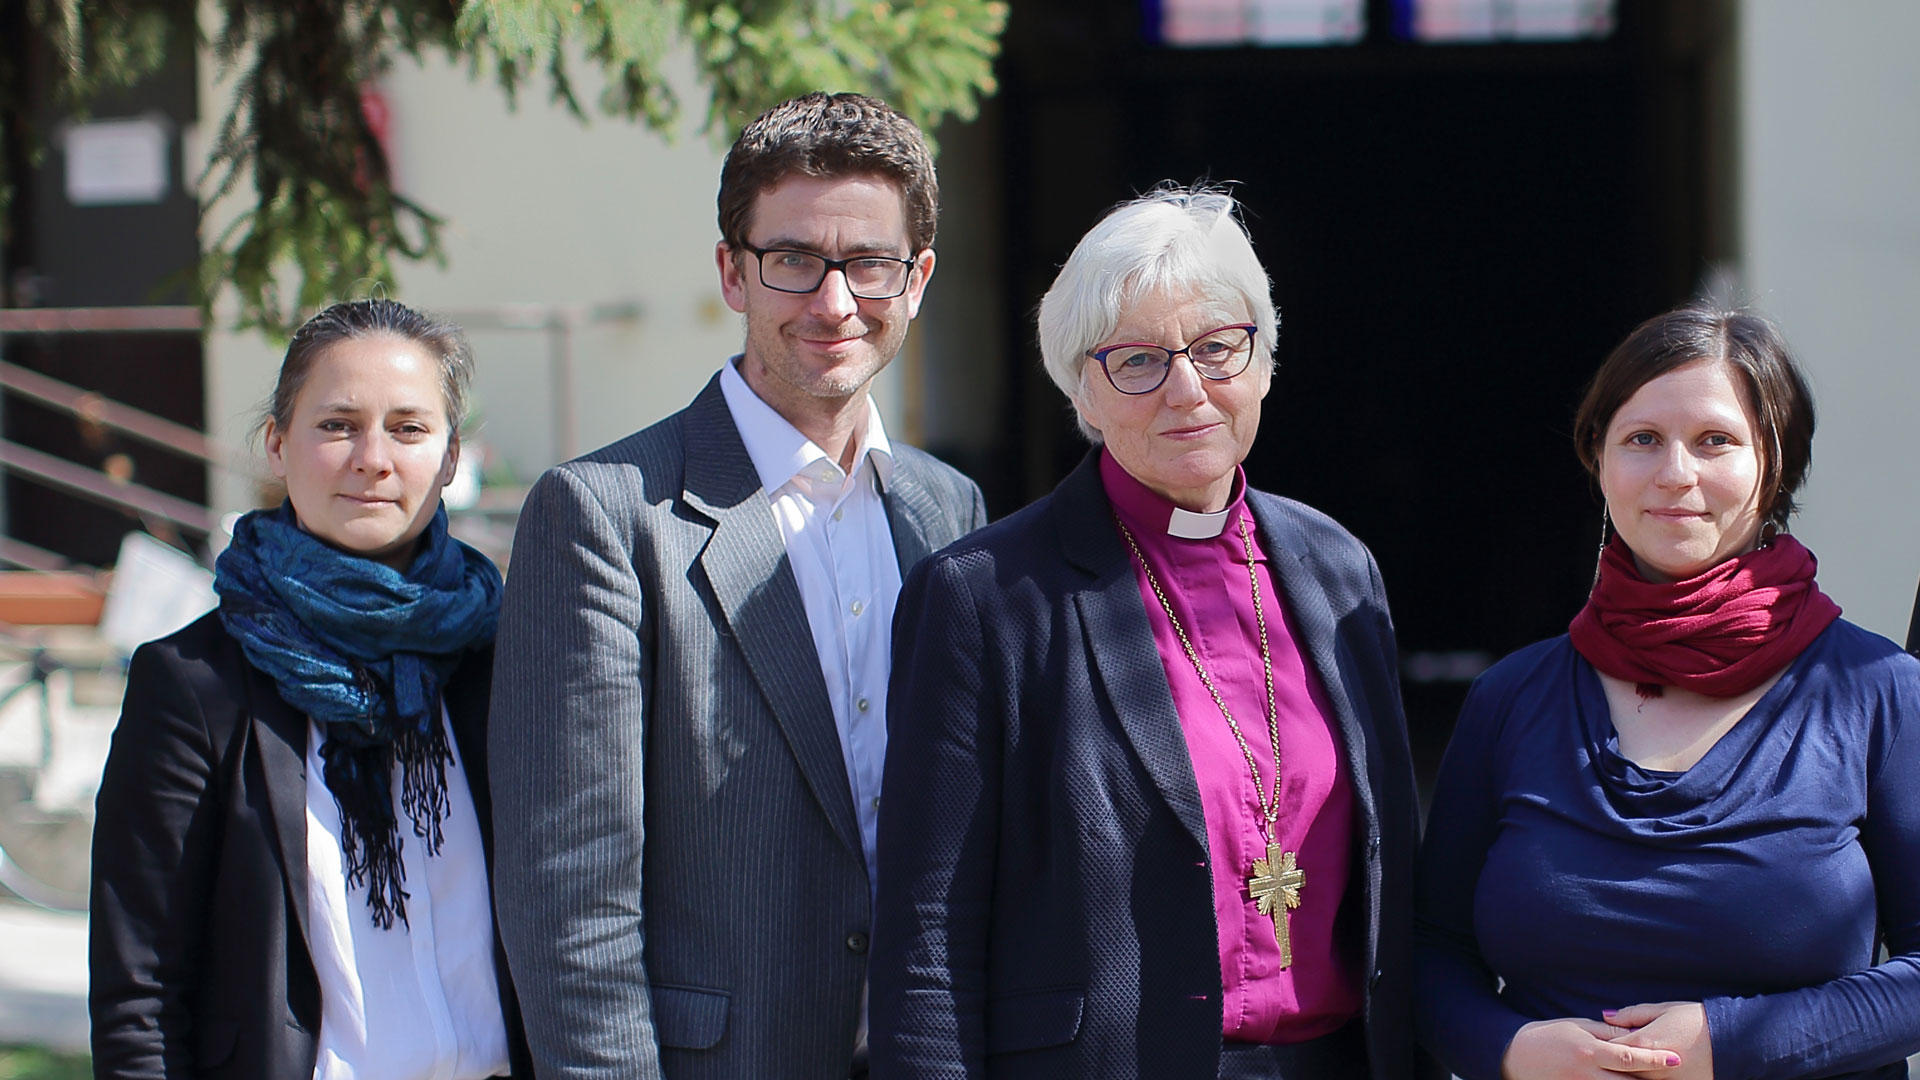 Archbishop together with collegues visiting Hungary.